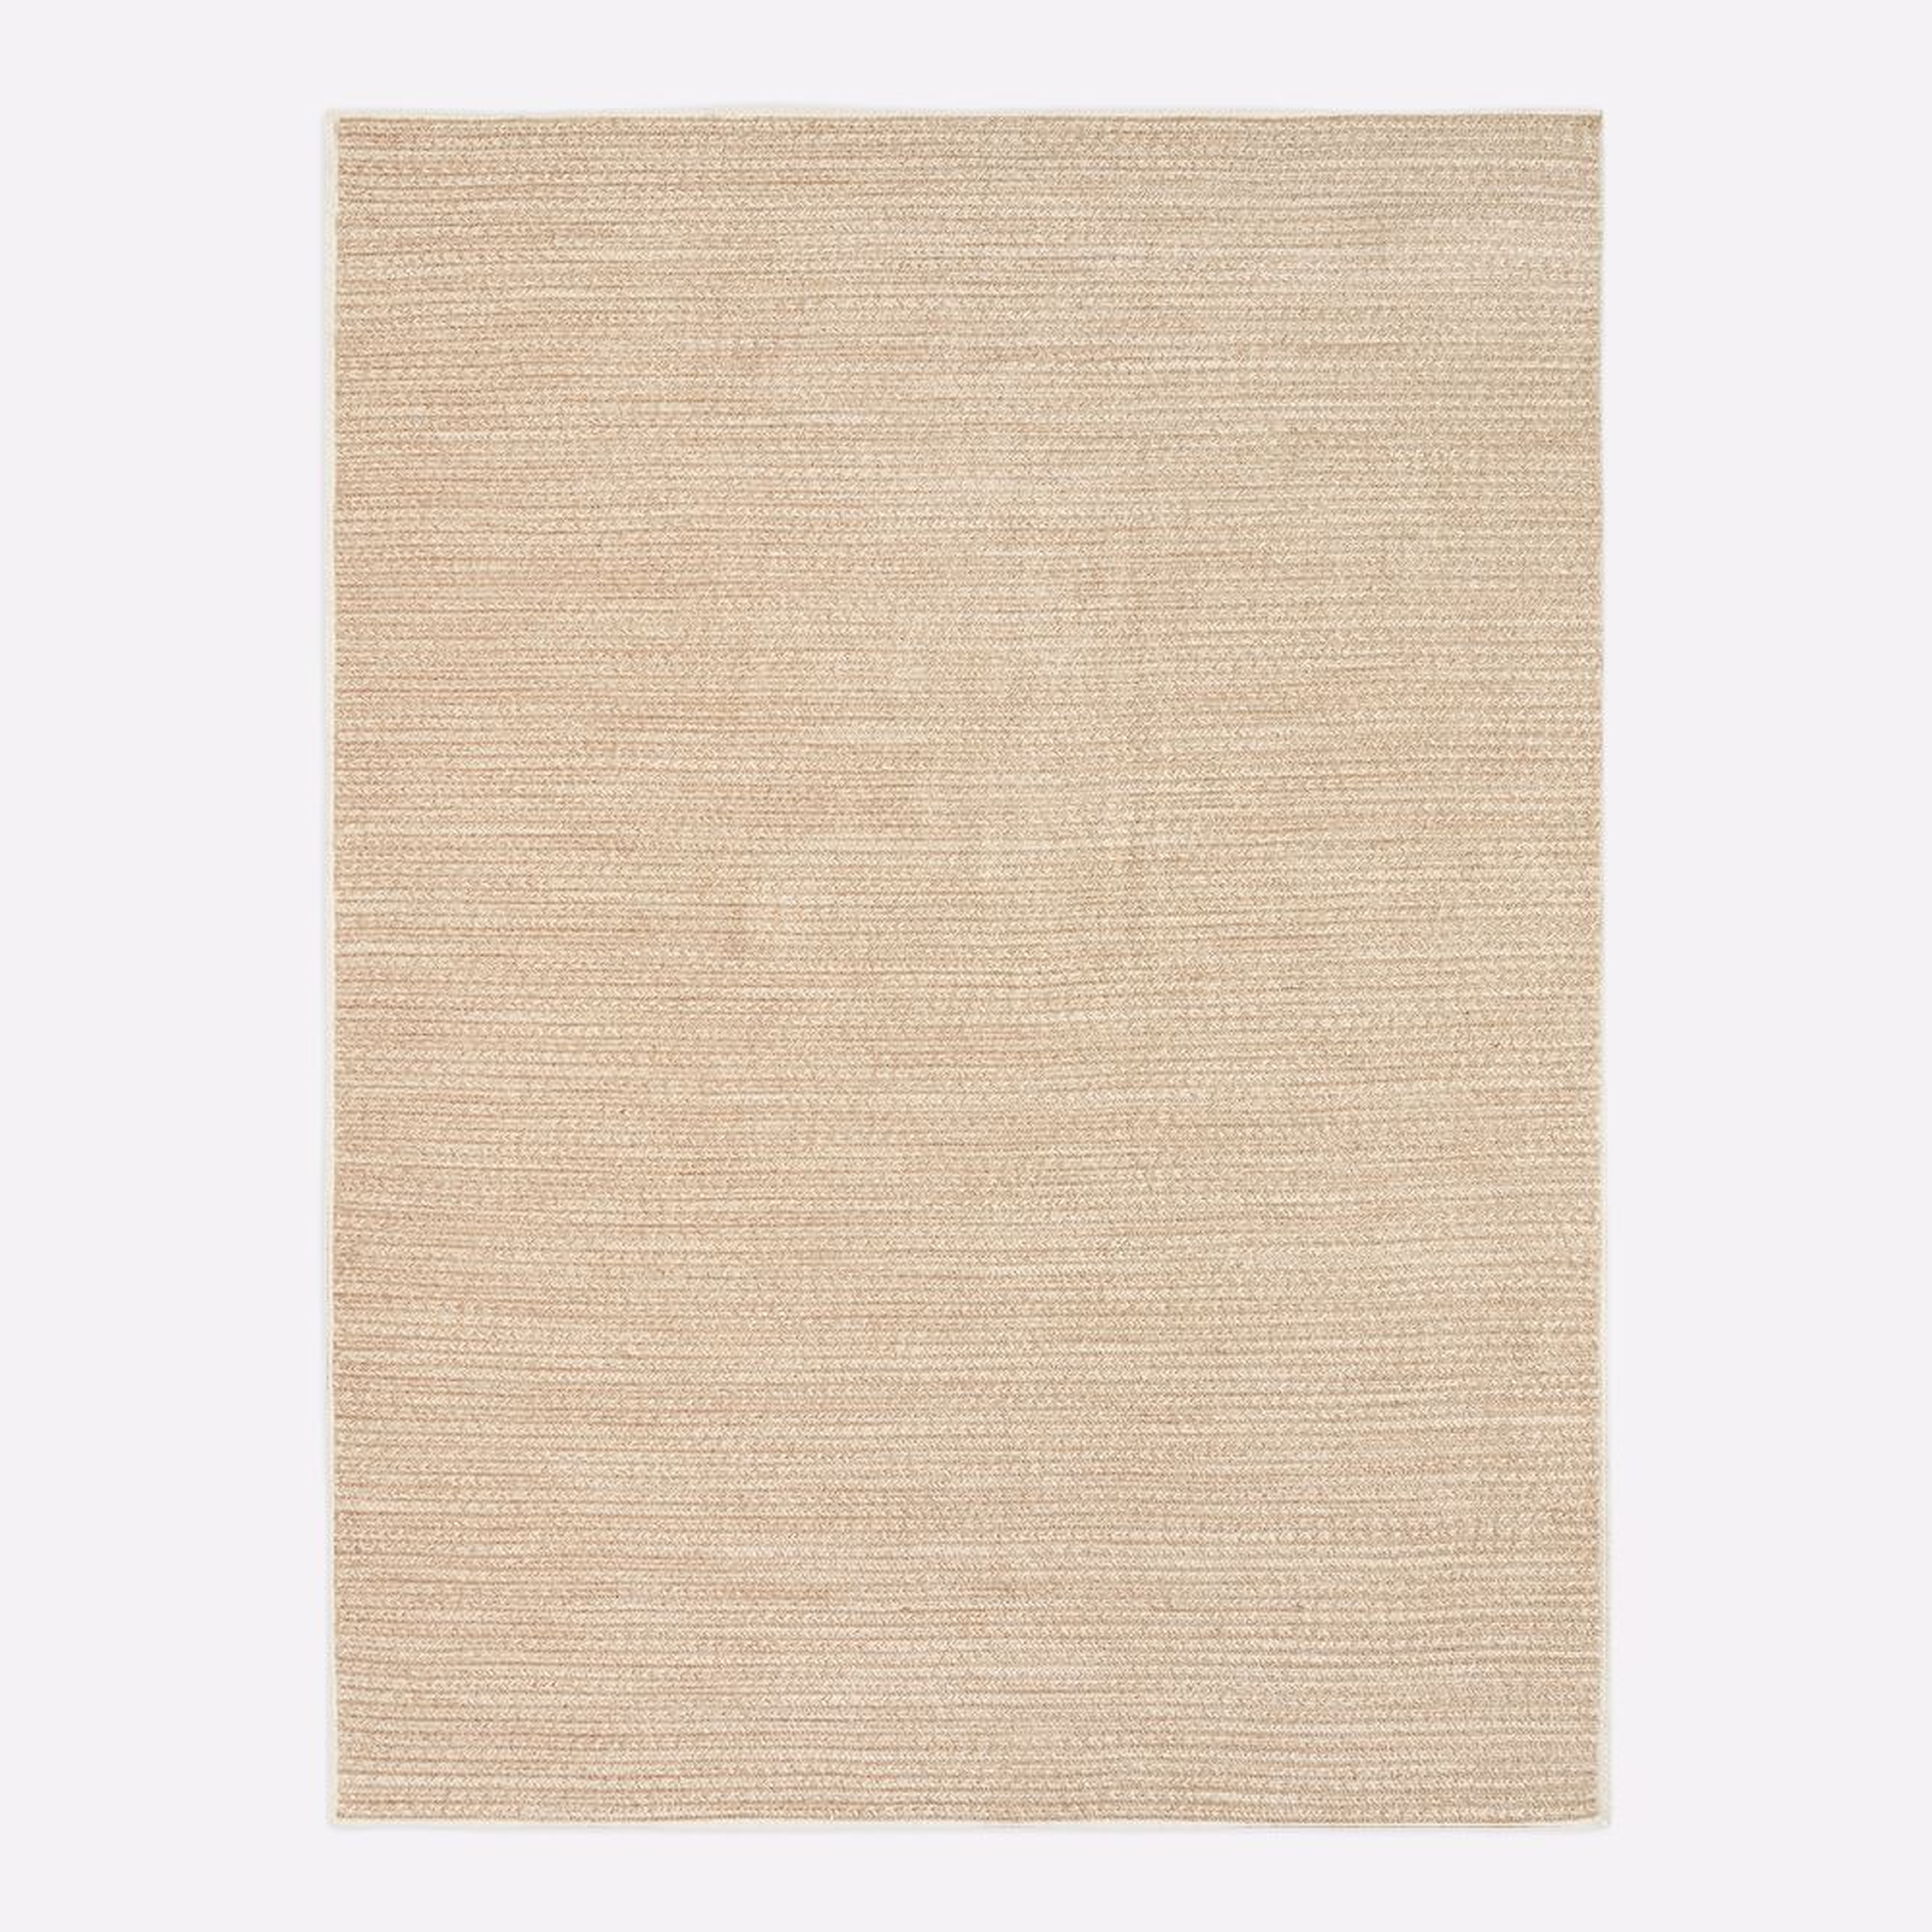 Woven Cable All Weather Rug, 8x10, Natural - West Elm